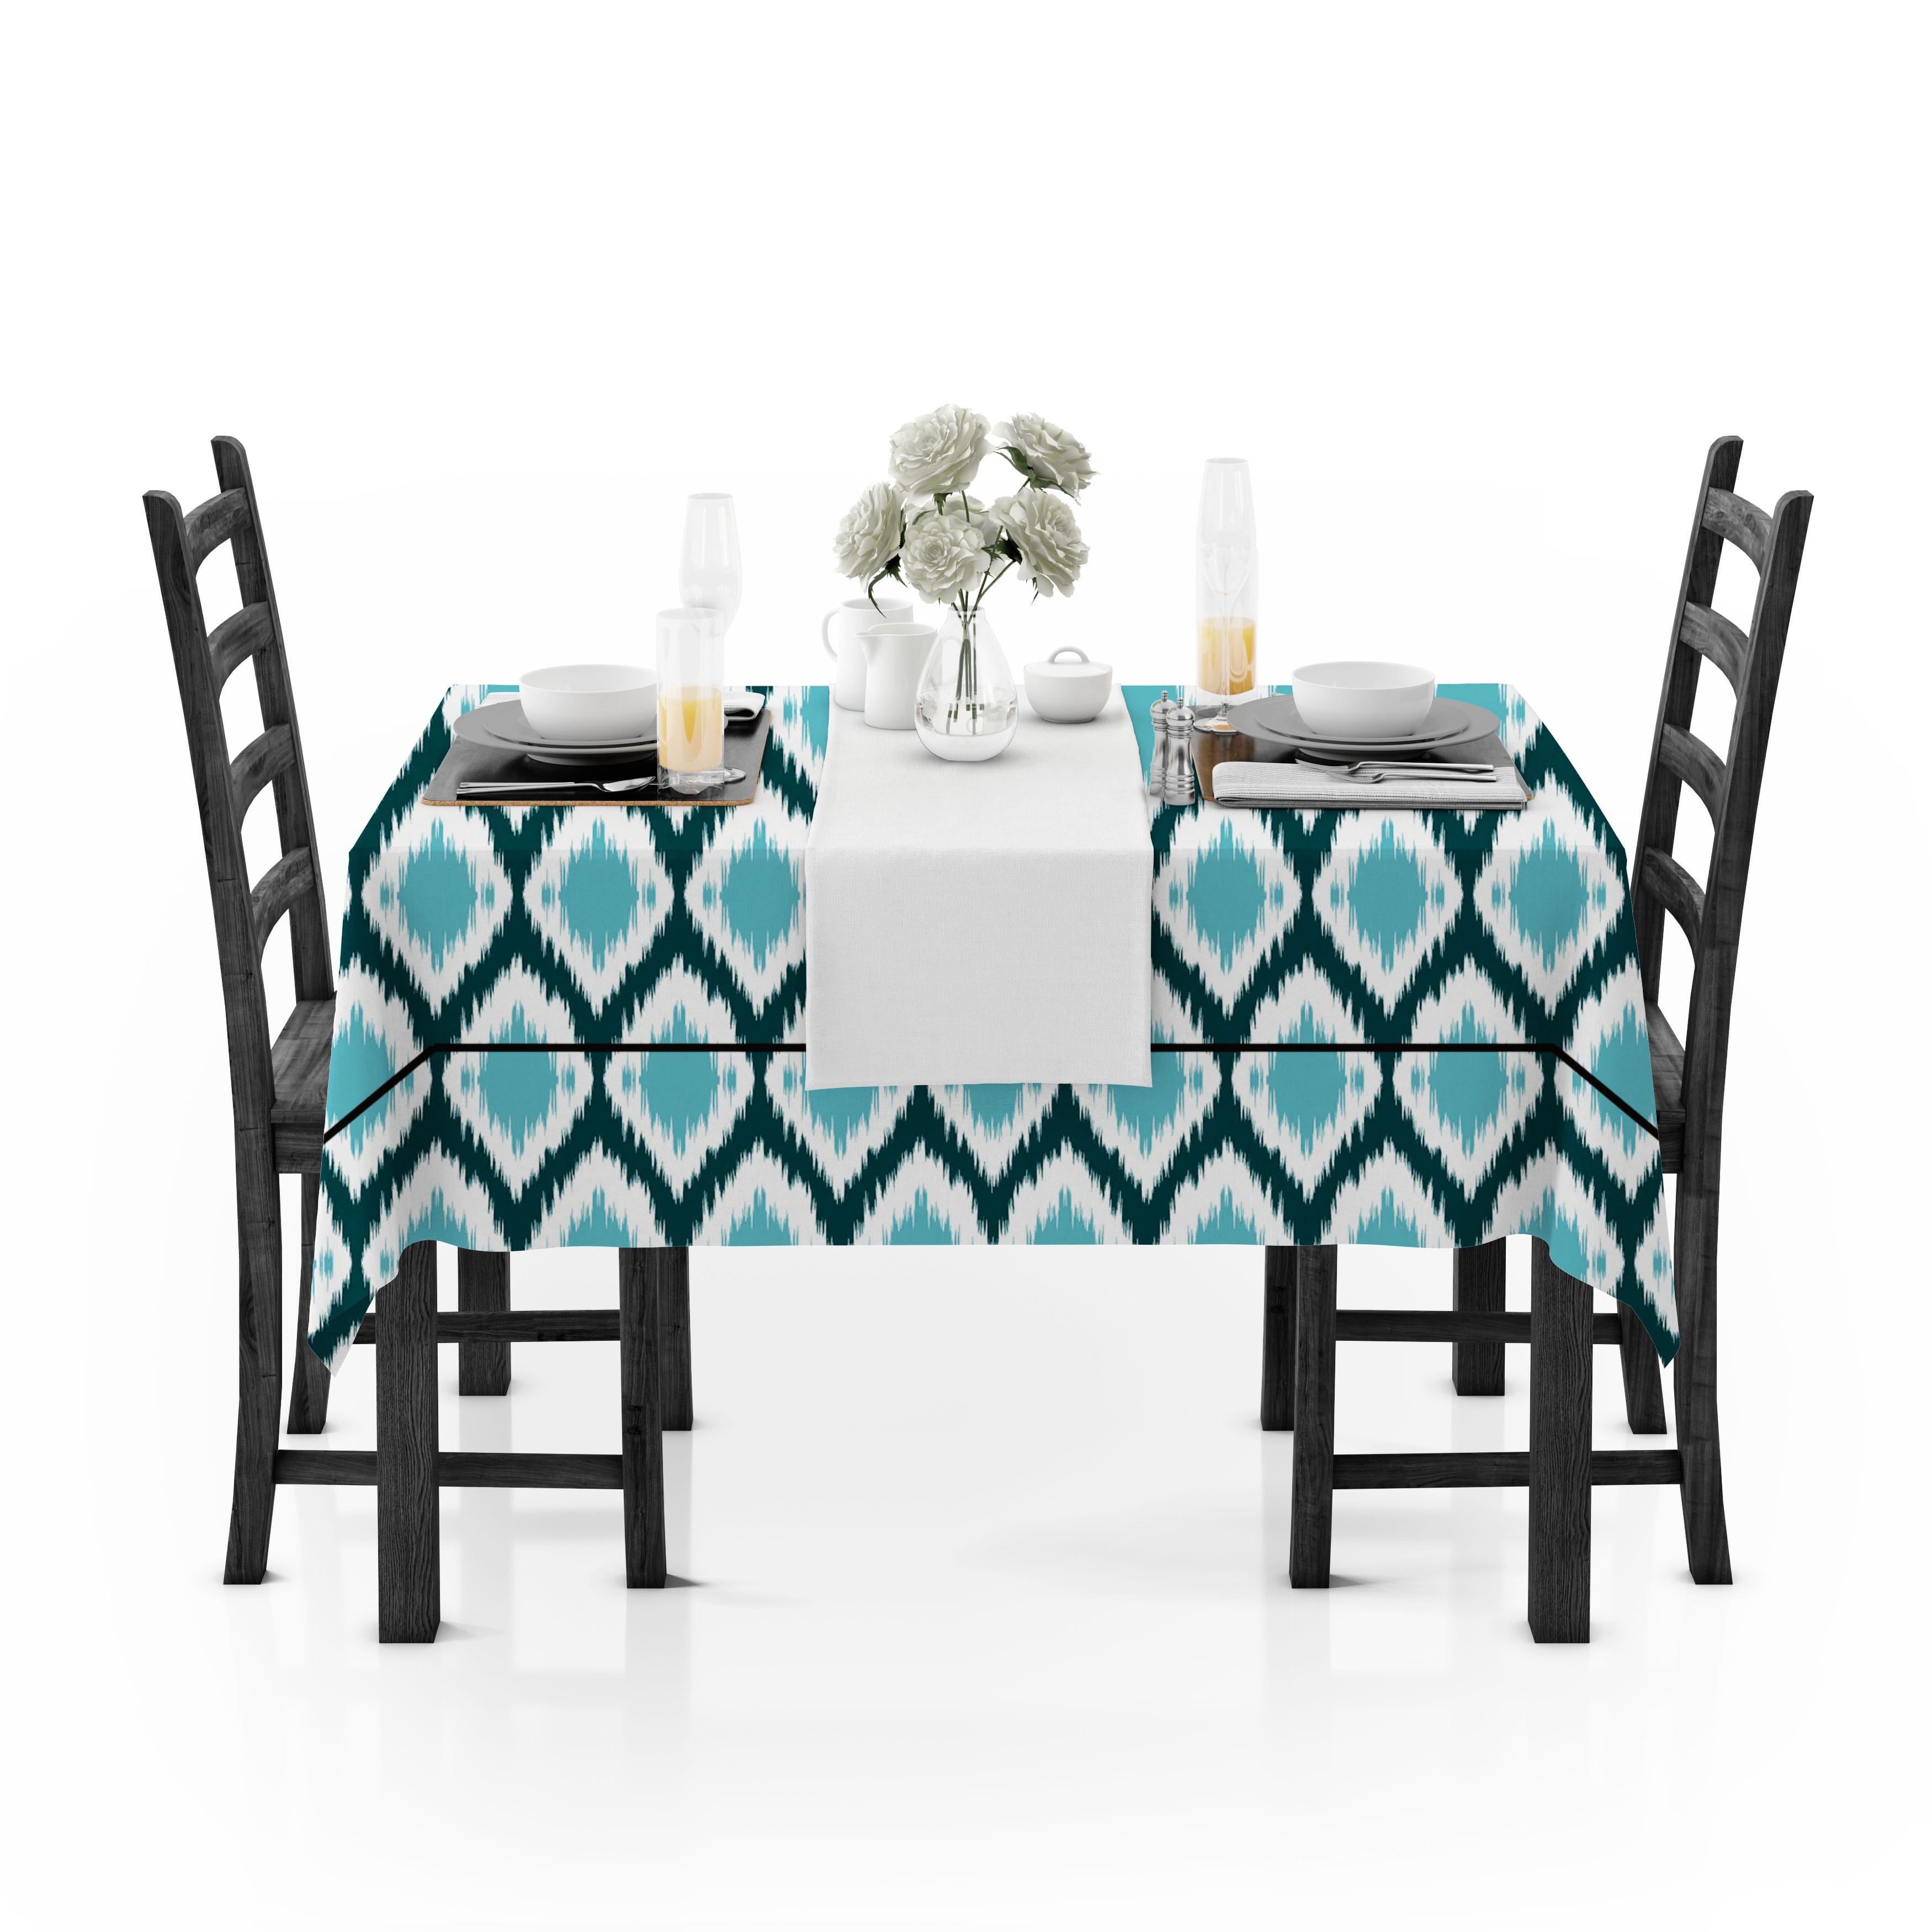 Prism Aqua Printed Cotton Damask Table Cover(1 Pc) online in India